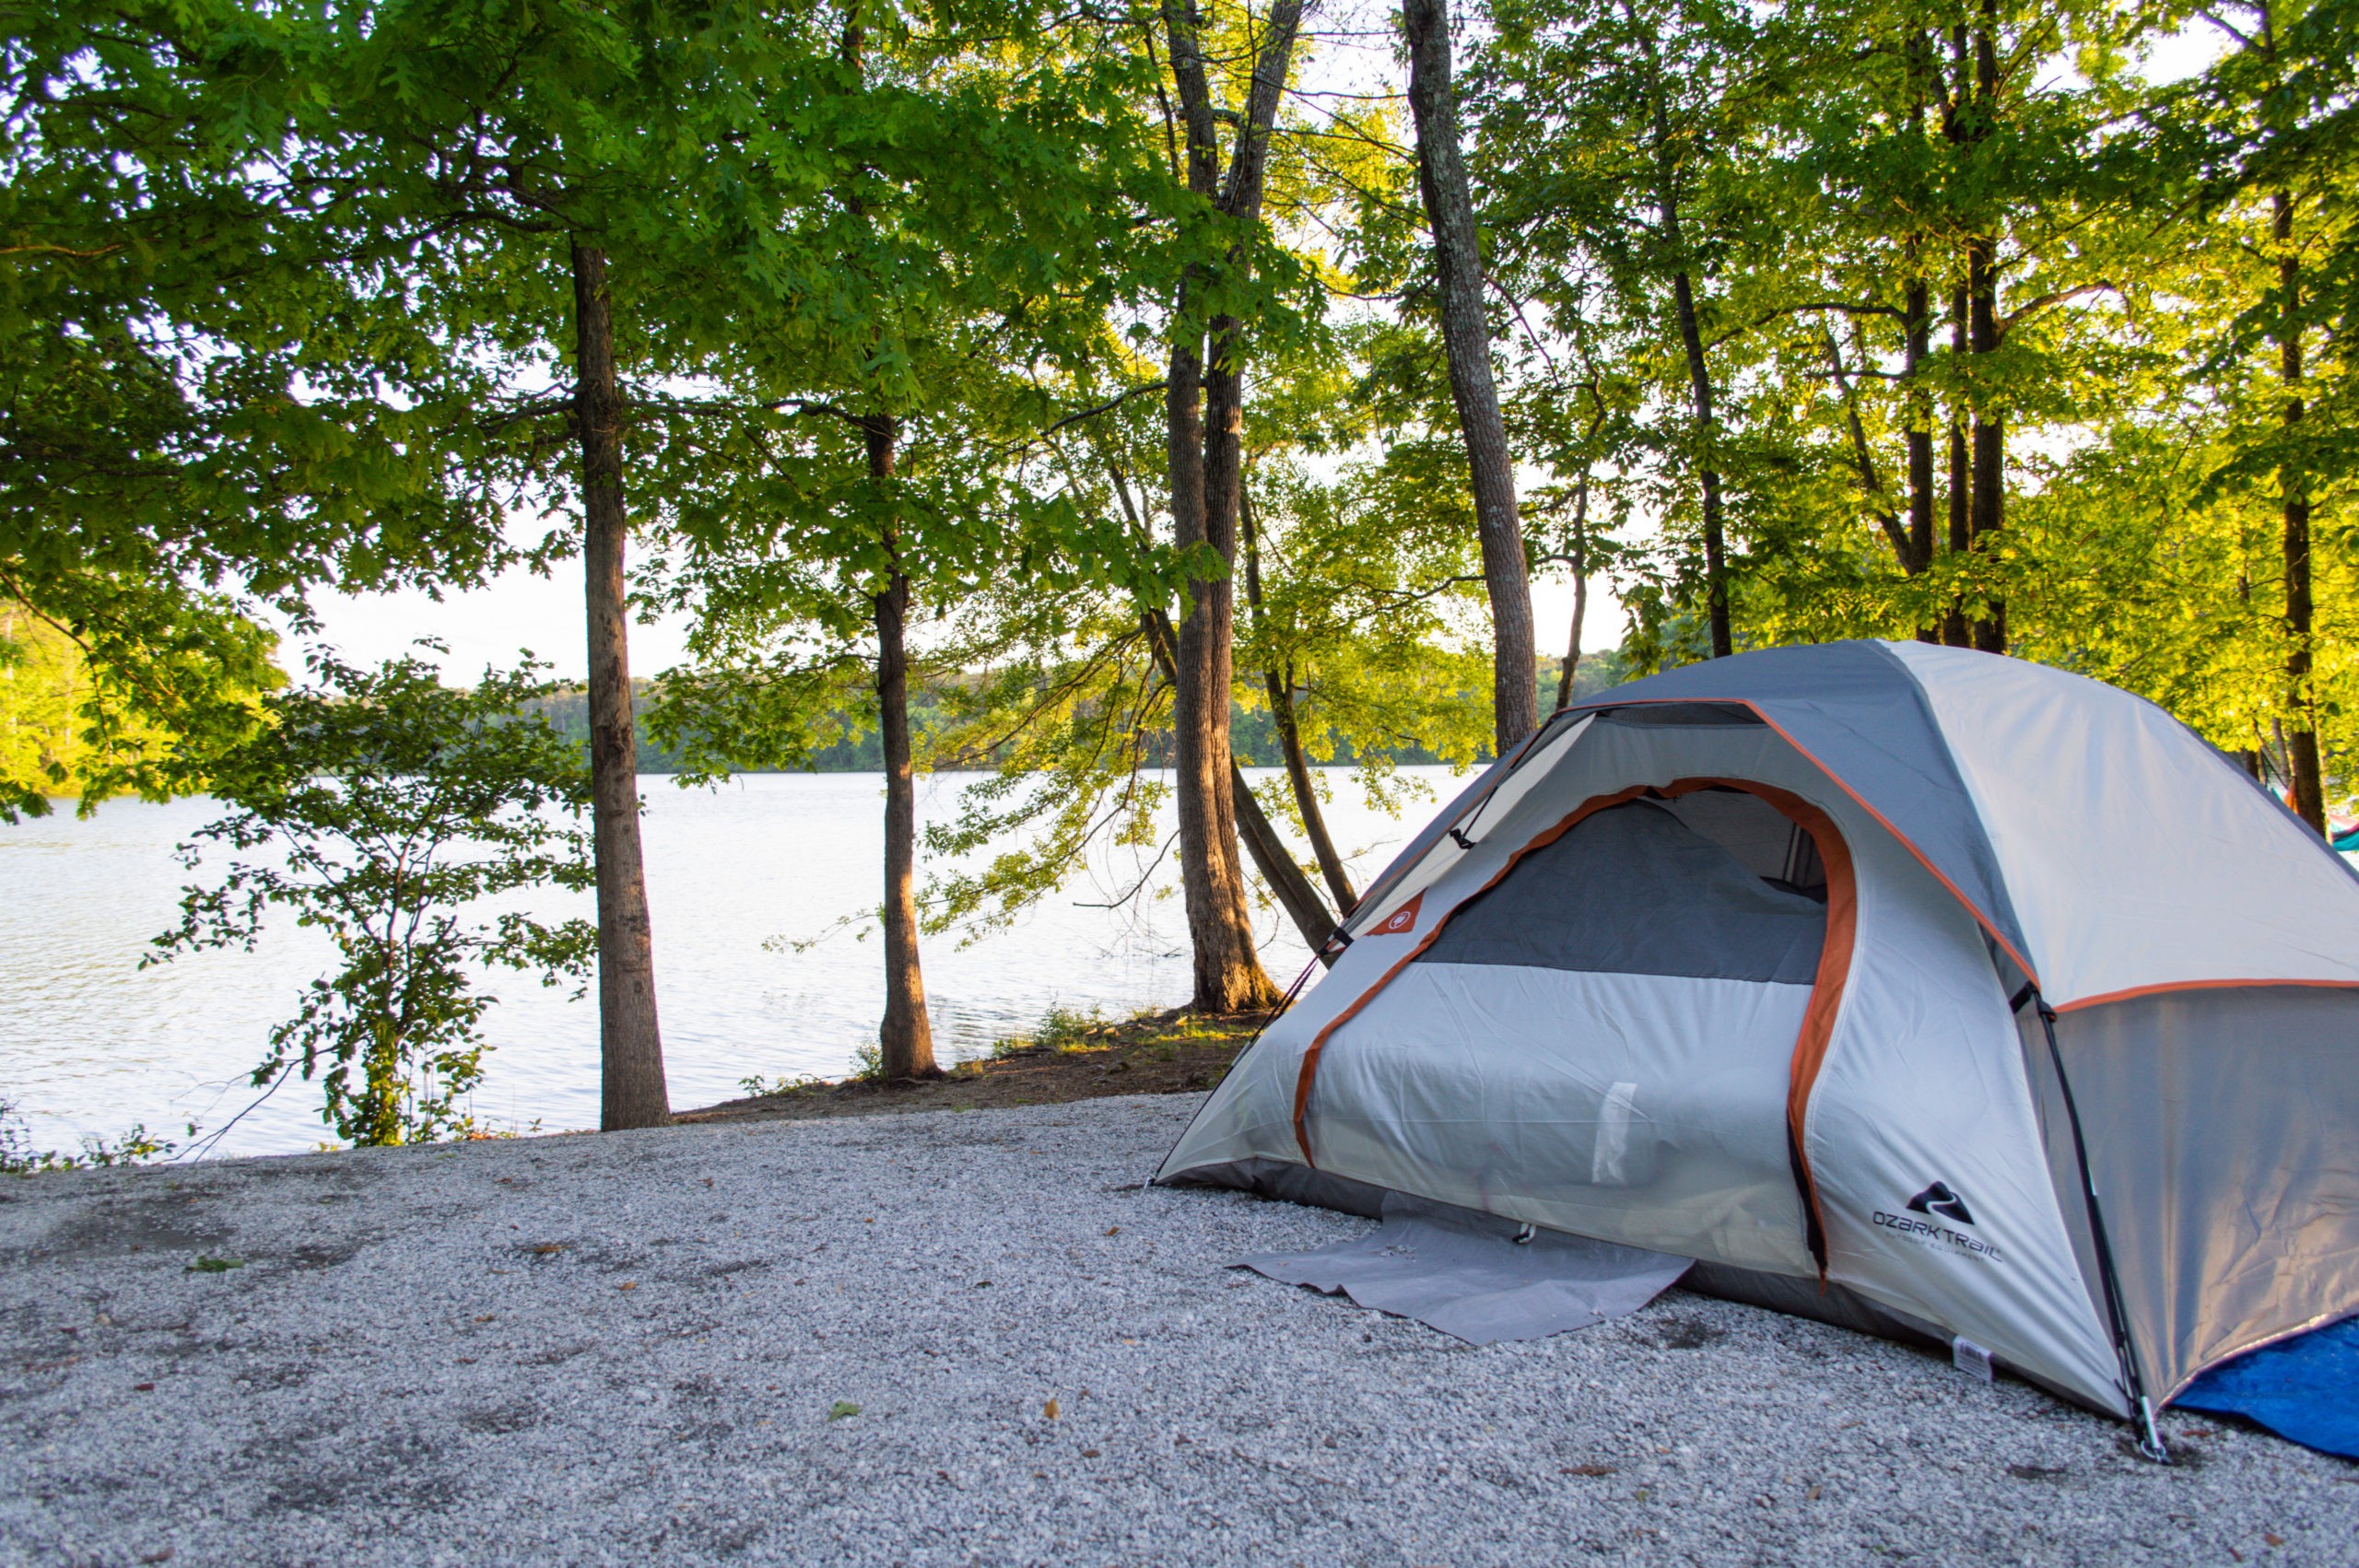 15 Camping Tips & Mistakes to Avoid, According to a Campground Owner